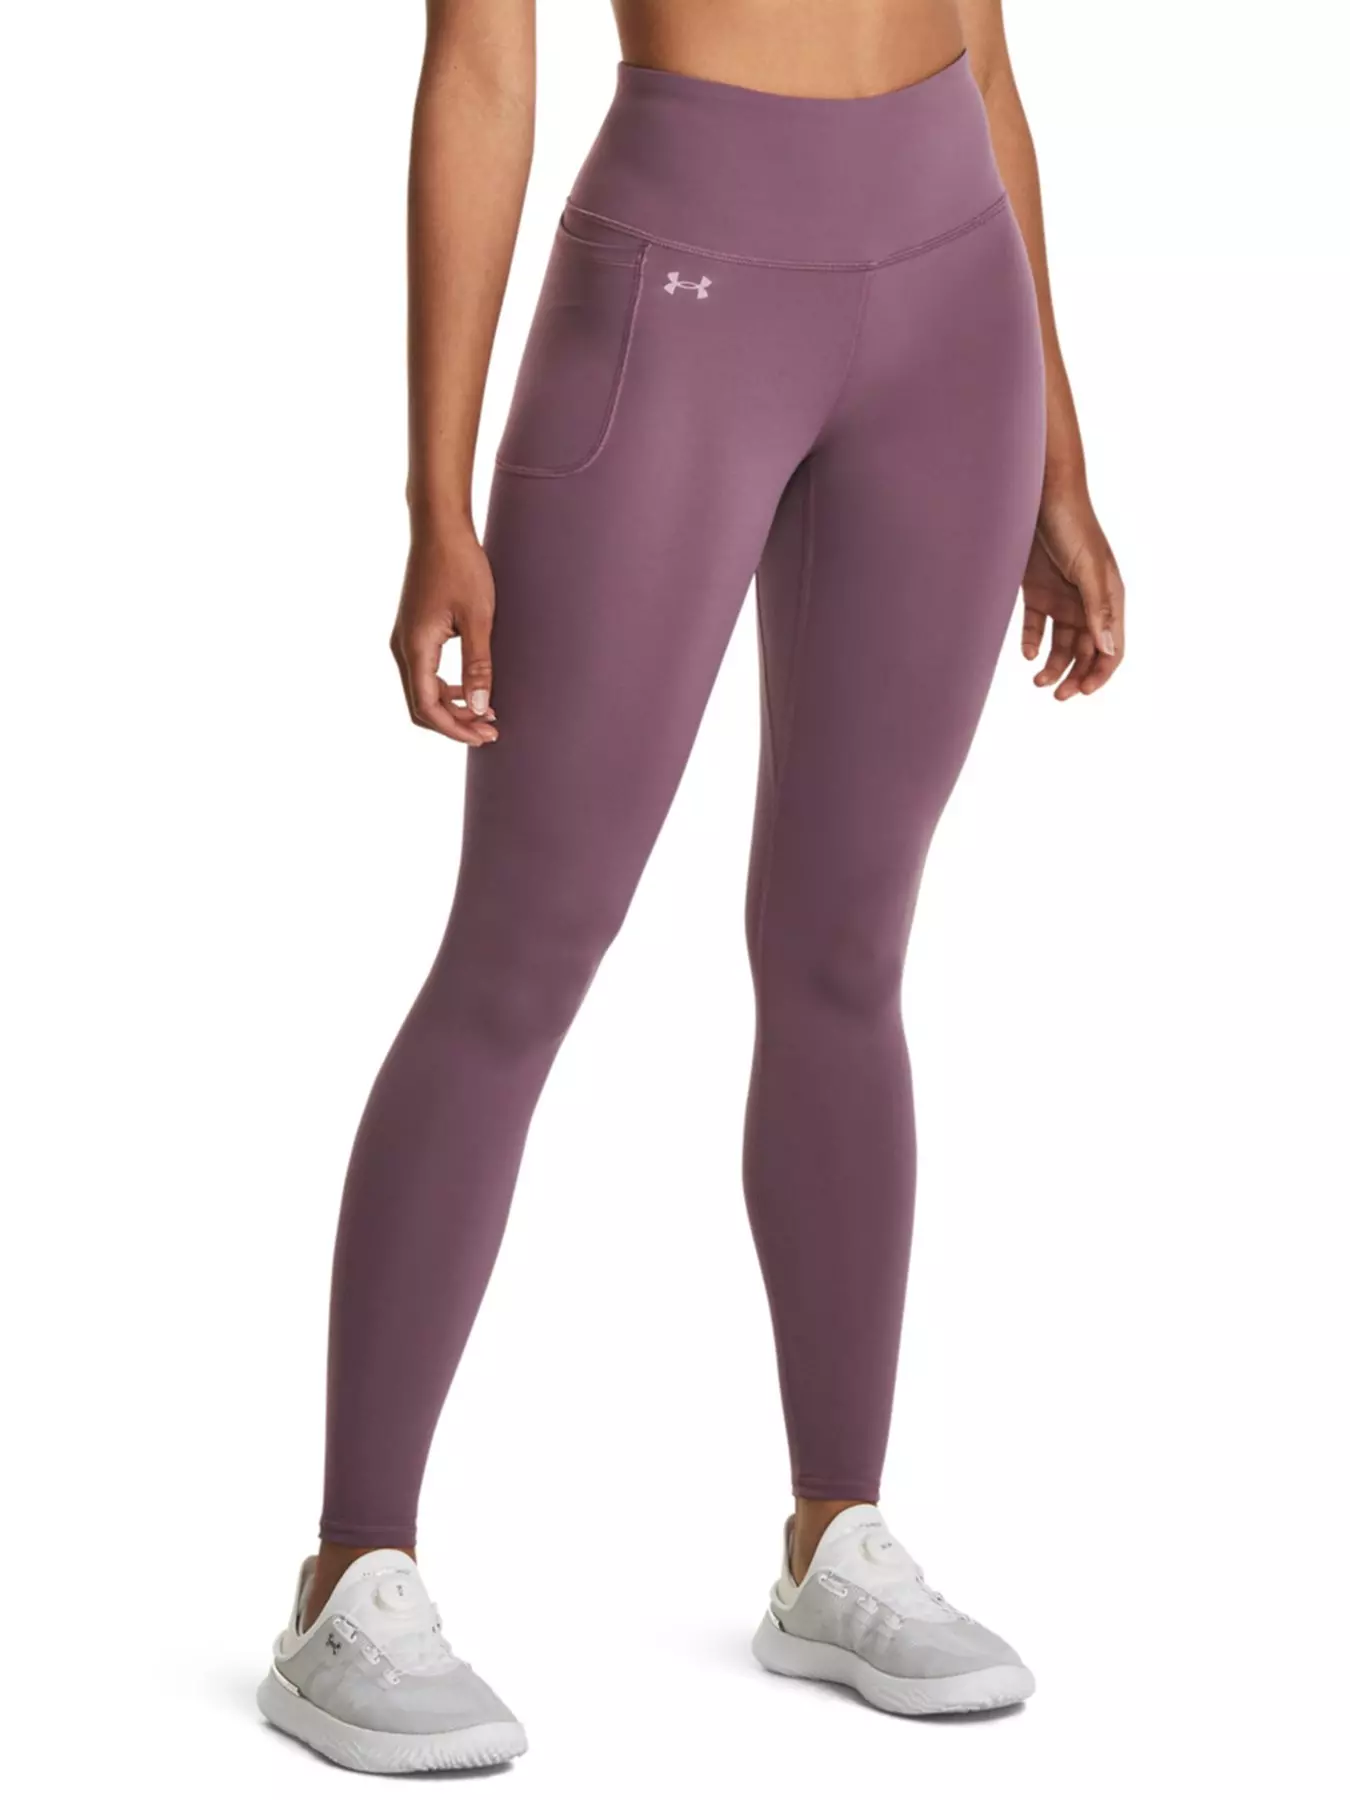 Under Armour's Meridian Leggings Are at the Top of Our Christmas